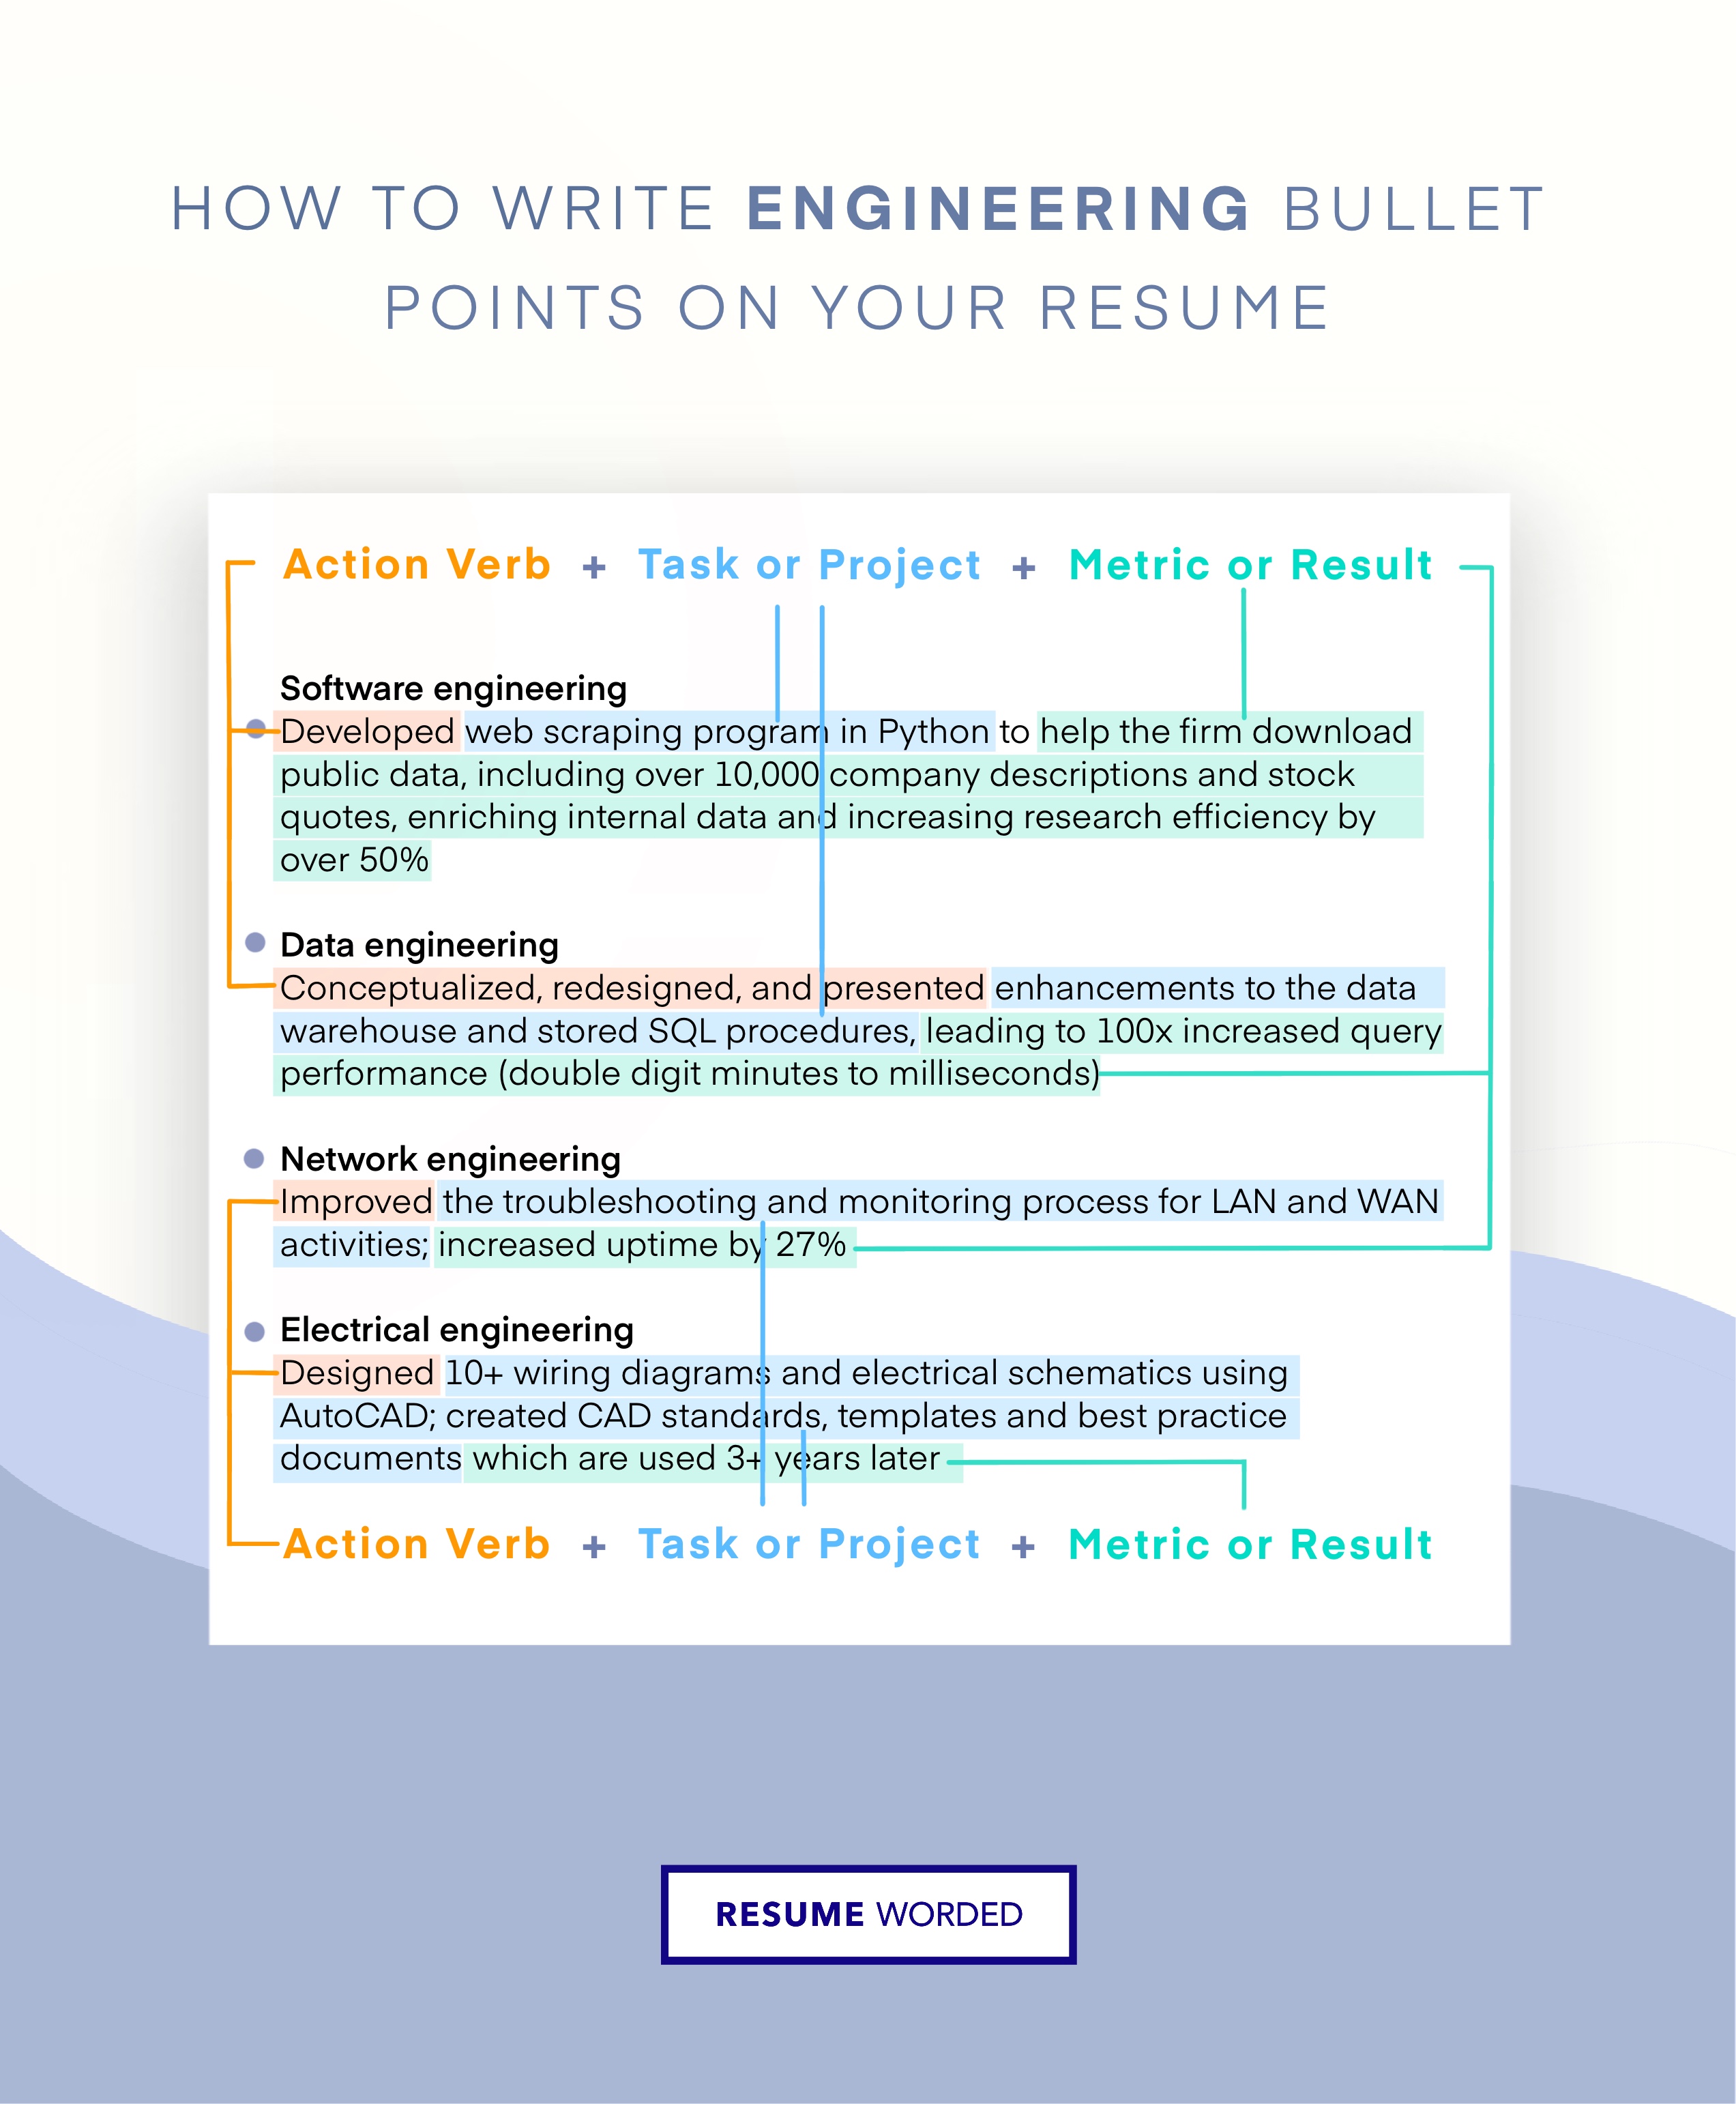 University projects relevant to civil engineering - Entry Level Civil Engineer Resume